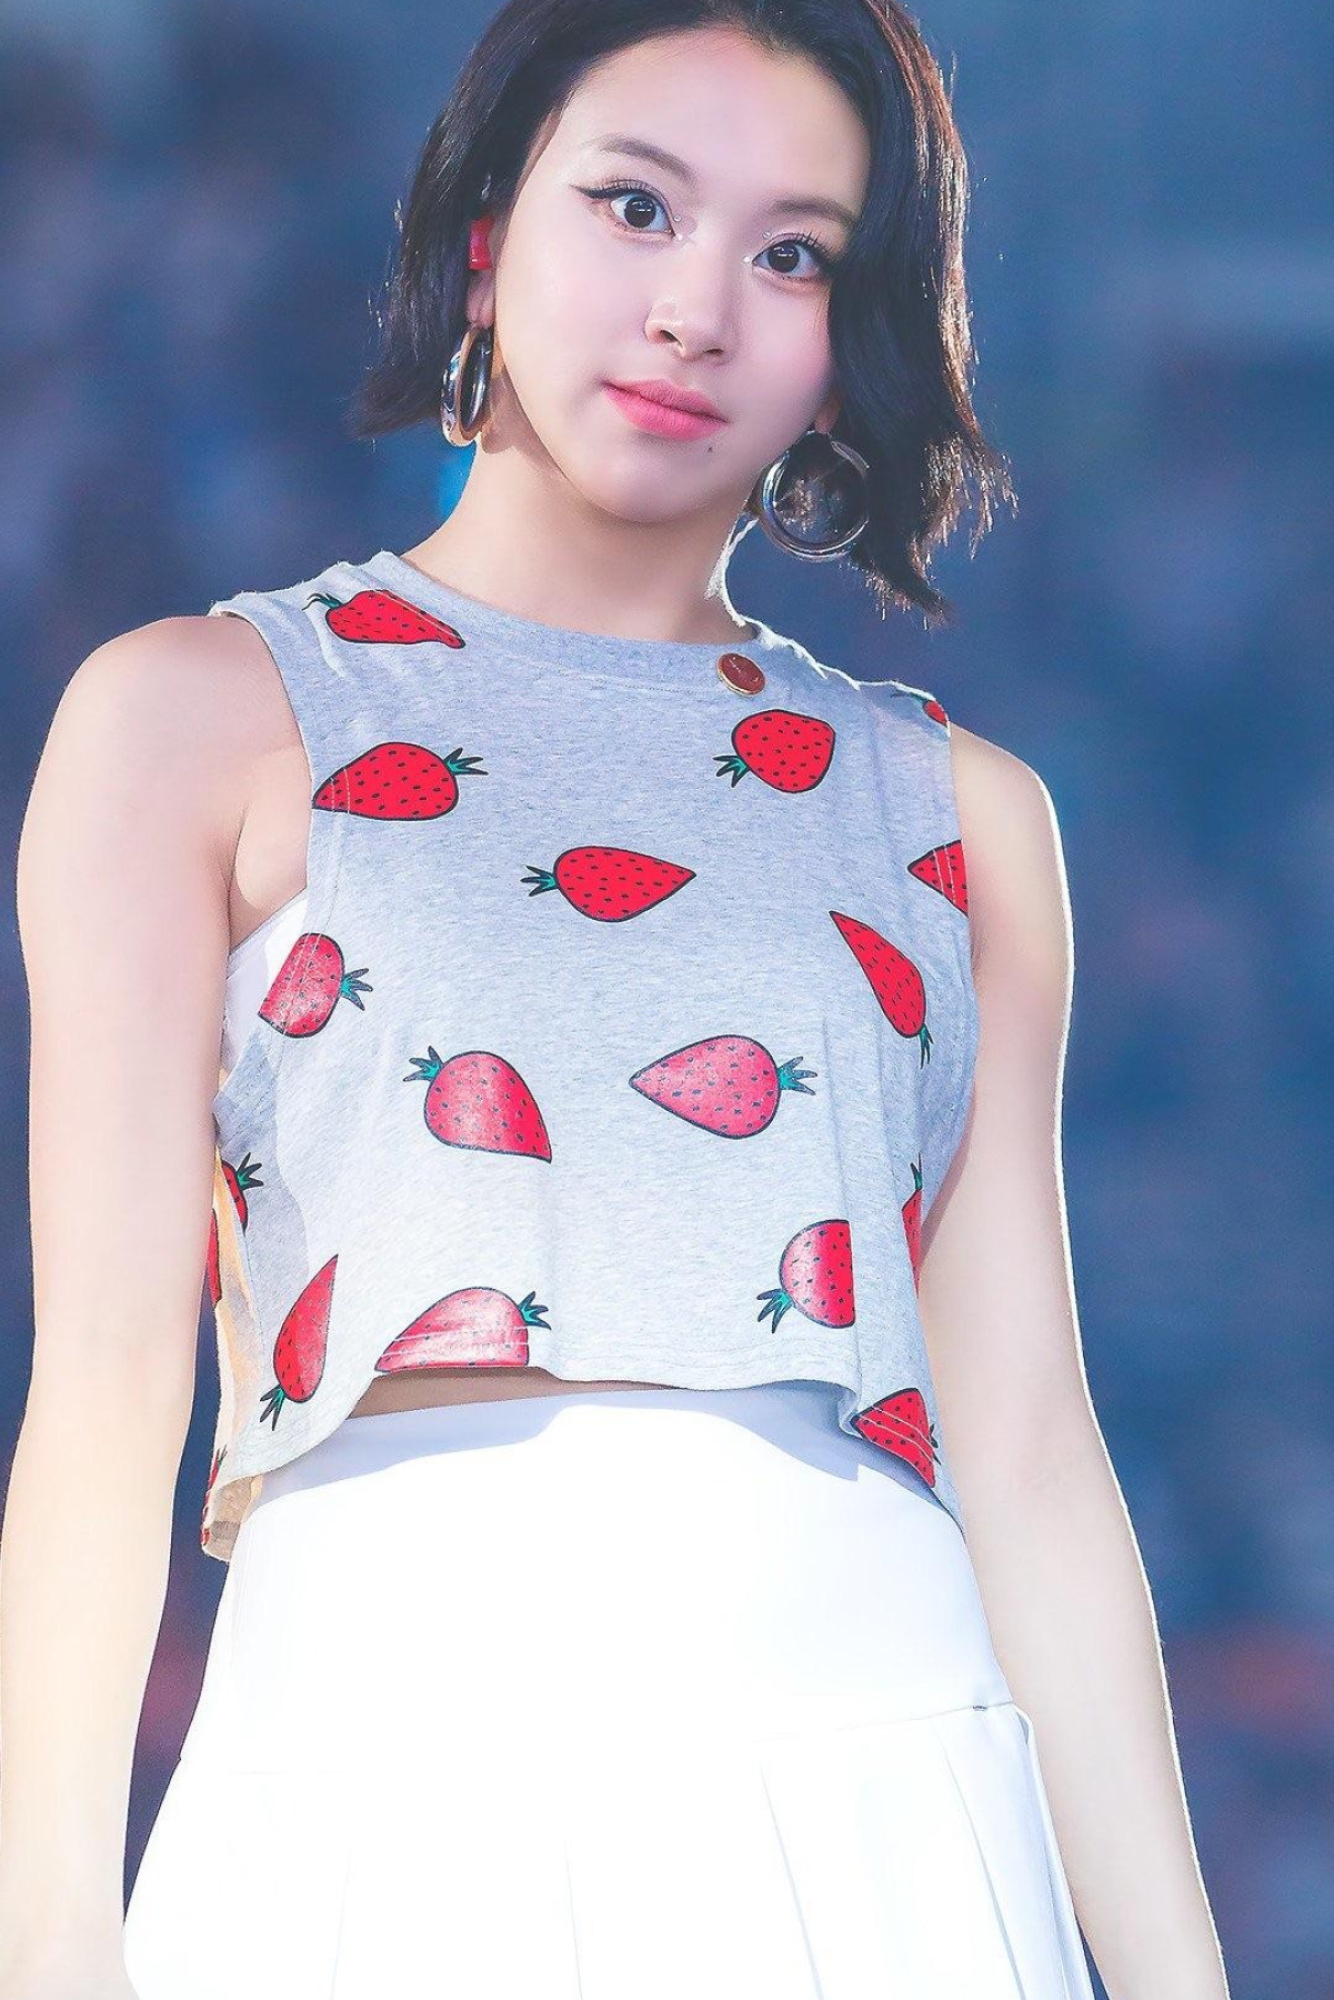 Son Chaeyoung Wallpapers - Top Free Son Chaeyoung Backgrounds 1340x2000